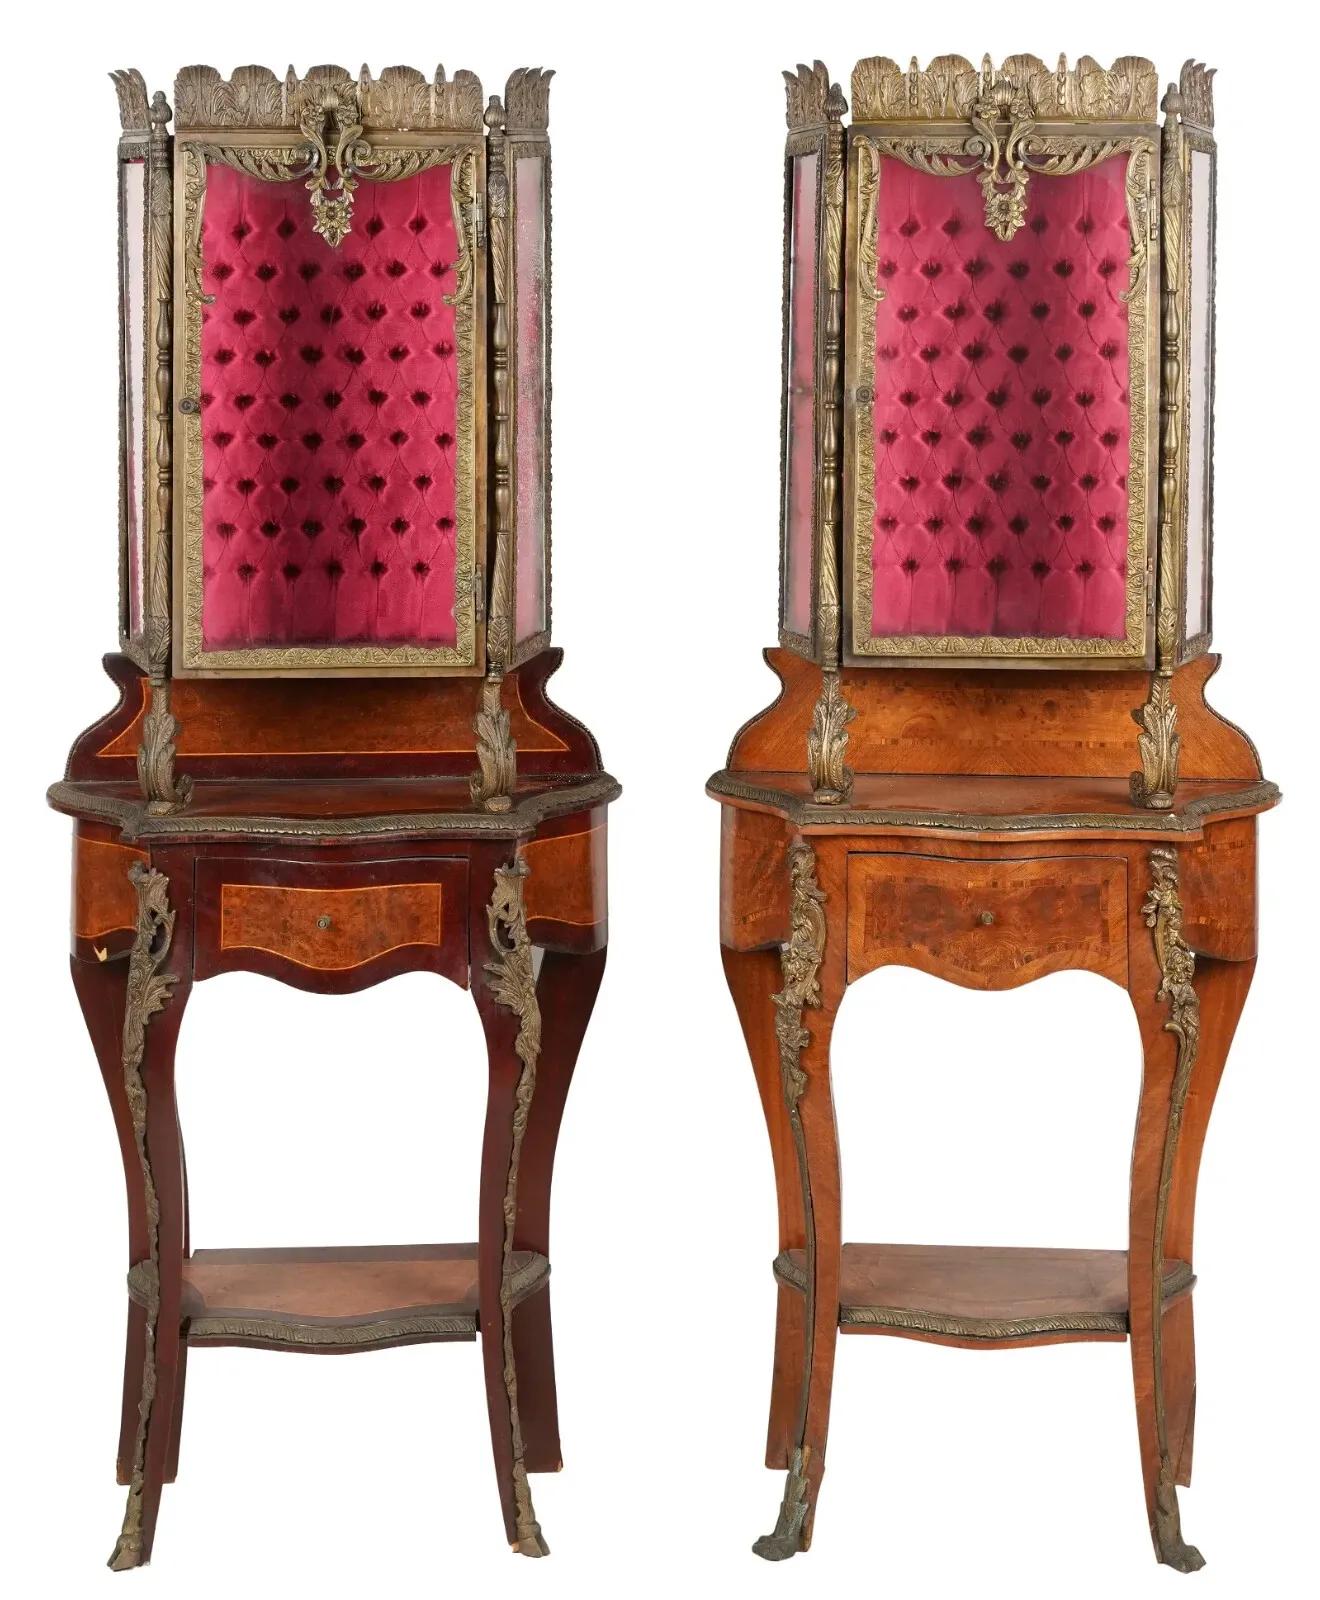 Gorgeous Pair of Vitrine Cabinets, Collection of Larry Flynt, Pair, Pink Background, Cross-Banded Borders and Metal Mounts,  Vintage!

This pair of vintage display cabinets, originally part of the Larry Flynt collection, exudes a timeless charm that